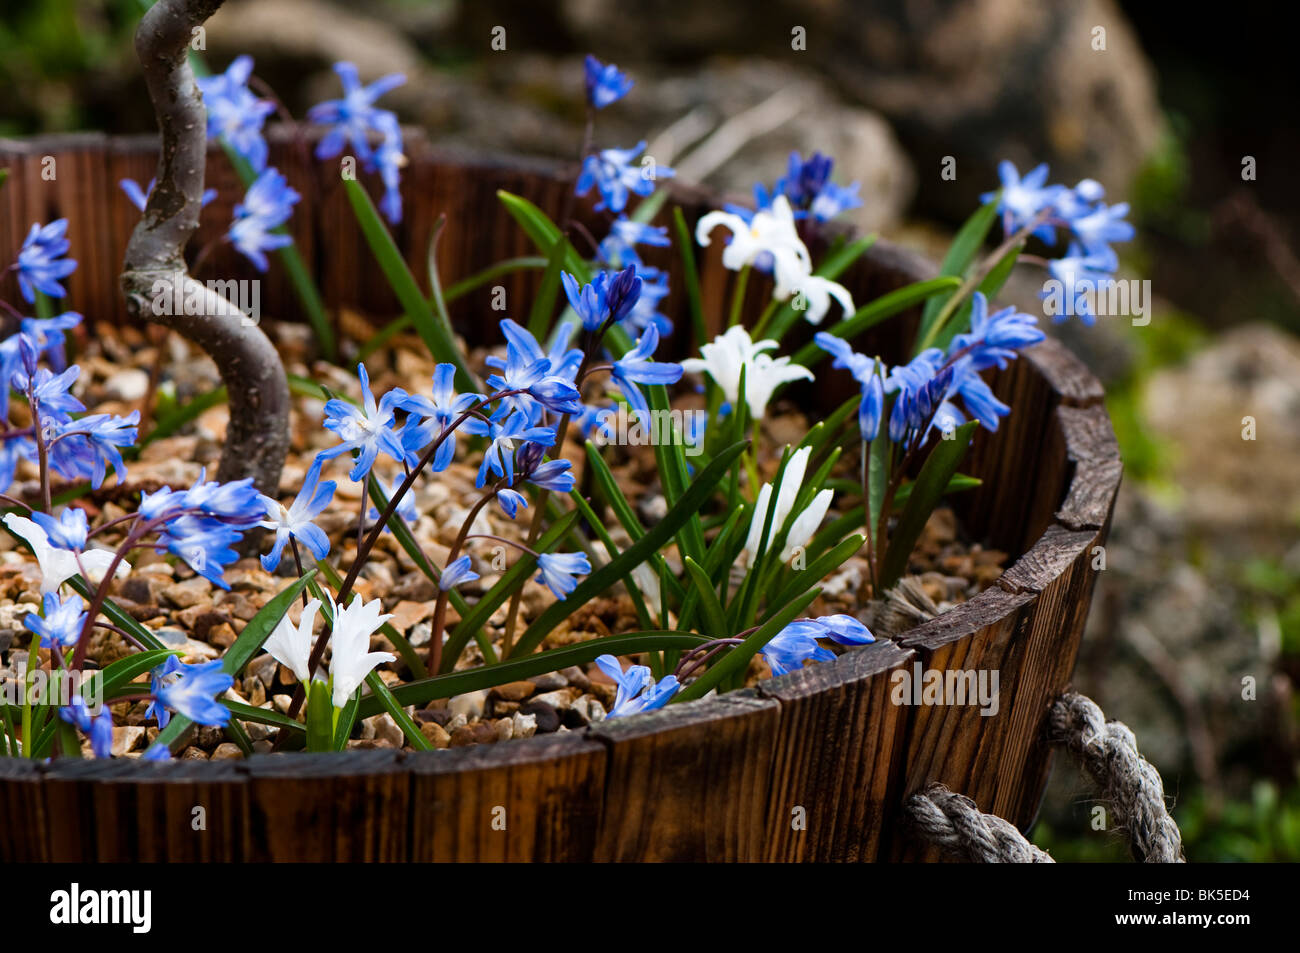 Chionodoxa Luciliae Alba and Chionodoxa Forbesii, Glory of the Snow in a container flower Stock Photo